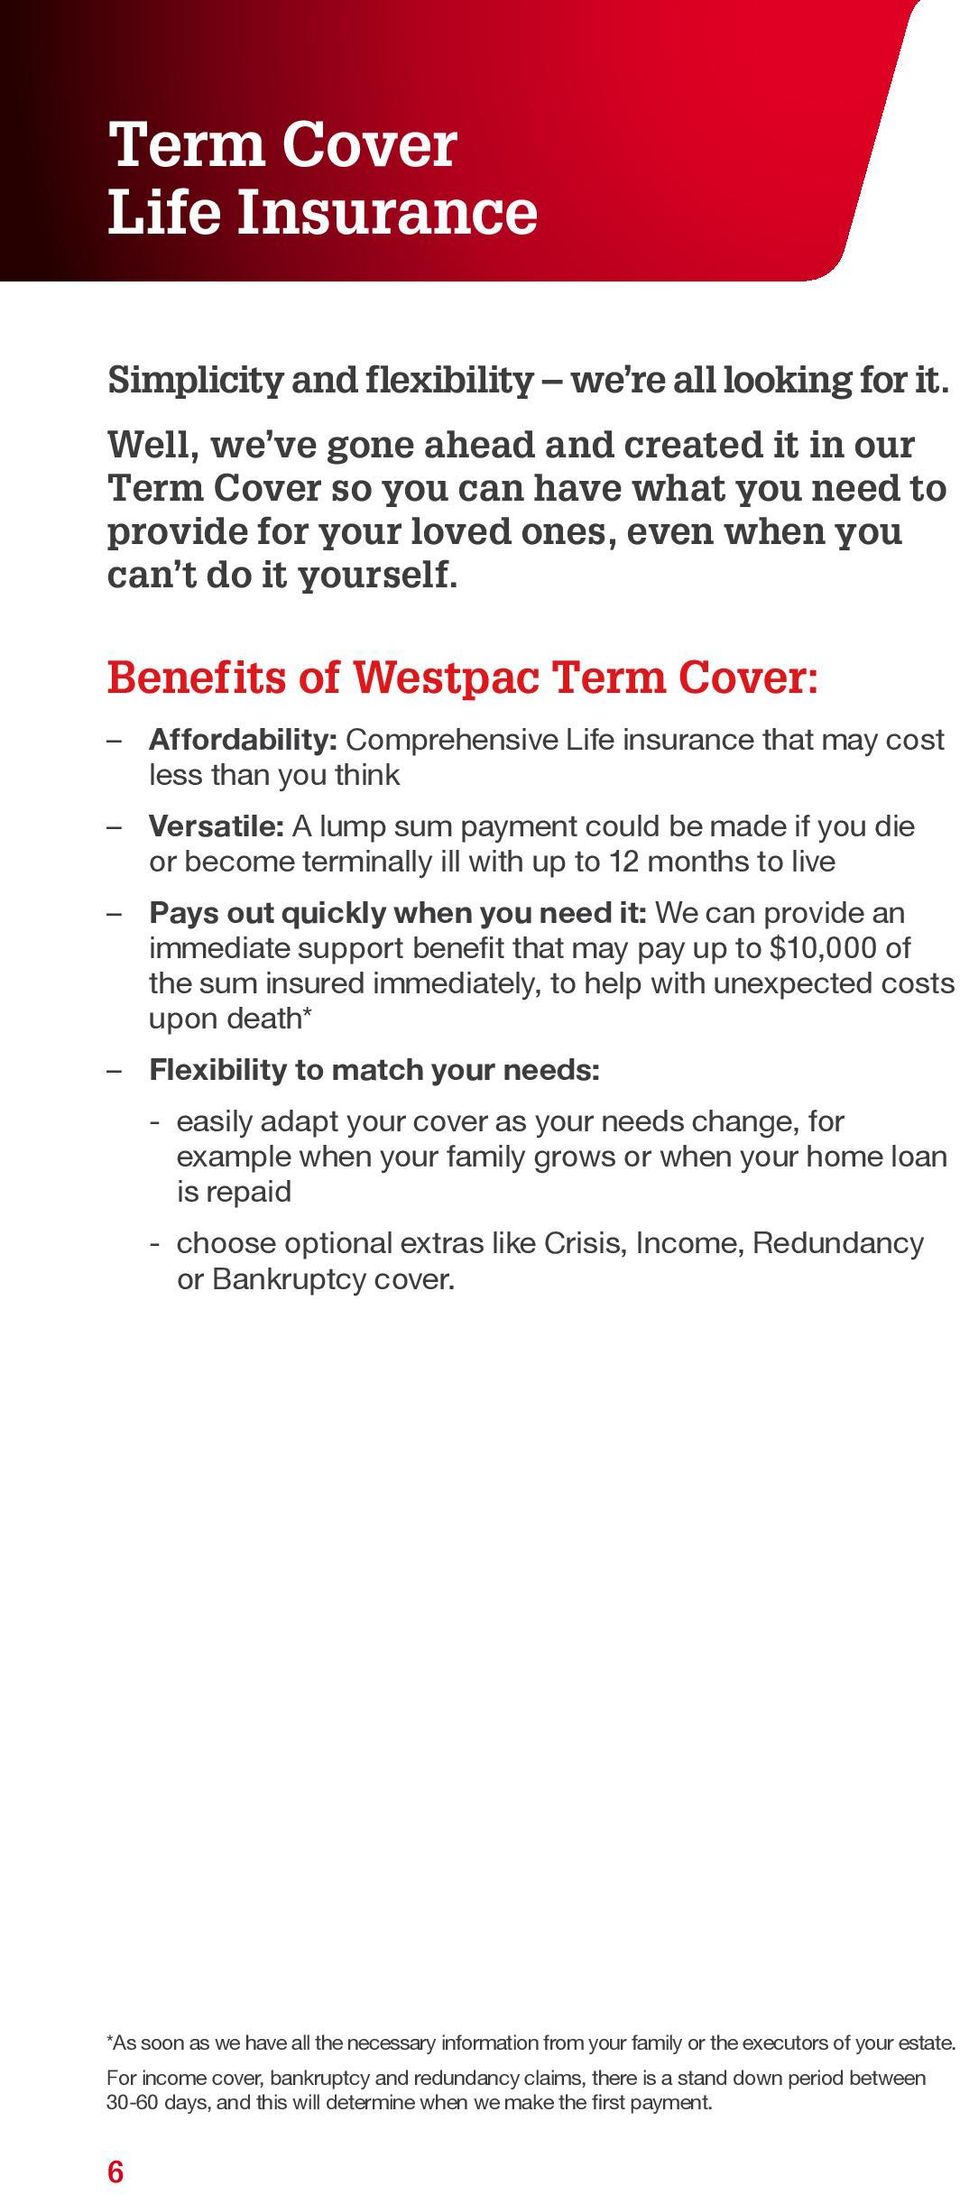 Benefits of Westpac Term Cover: Affordability: Comprehensive Life insurance that may cost less than you think Versatile: A lump sum payment could be made if you die or become terminally ill with up